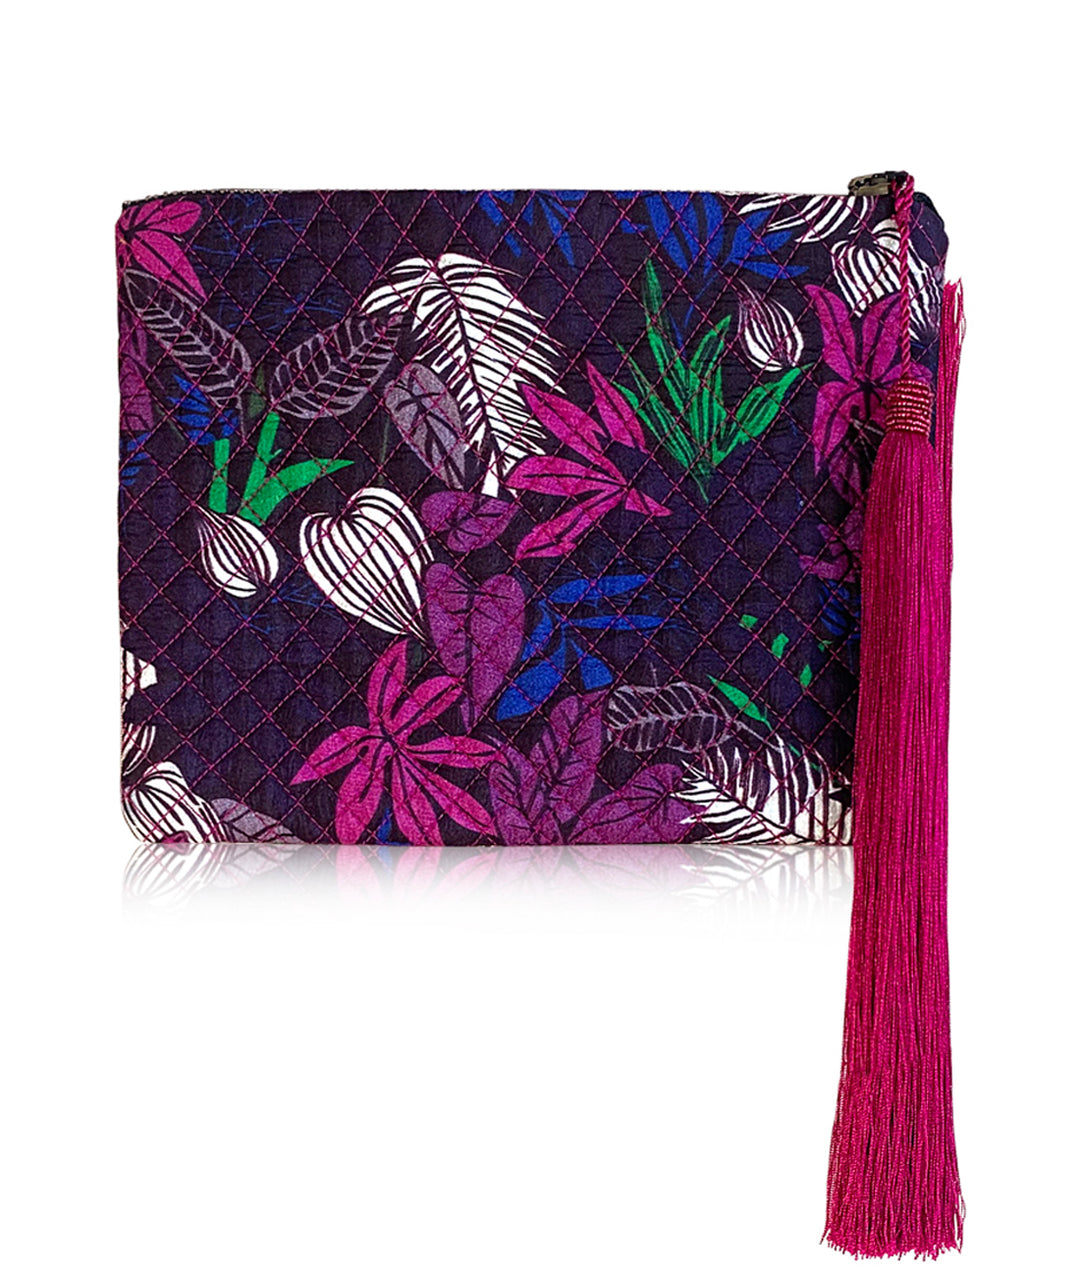 Silk Floral Print Pouch in Violet